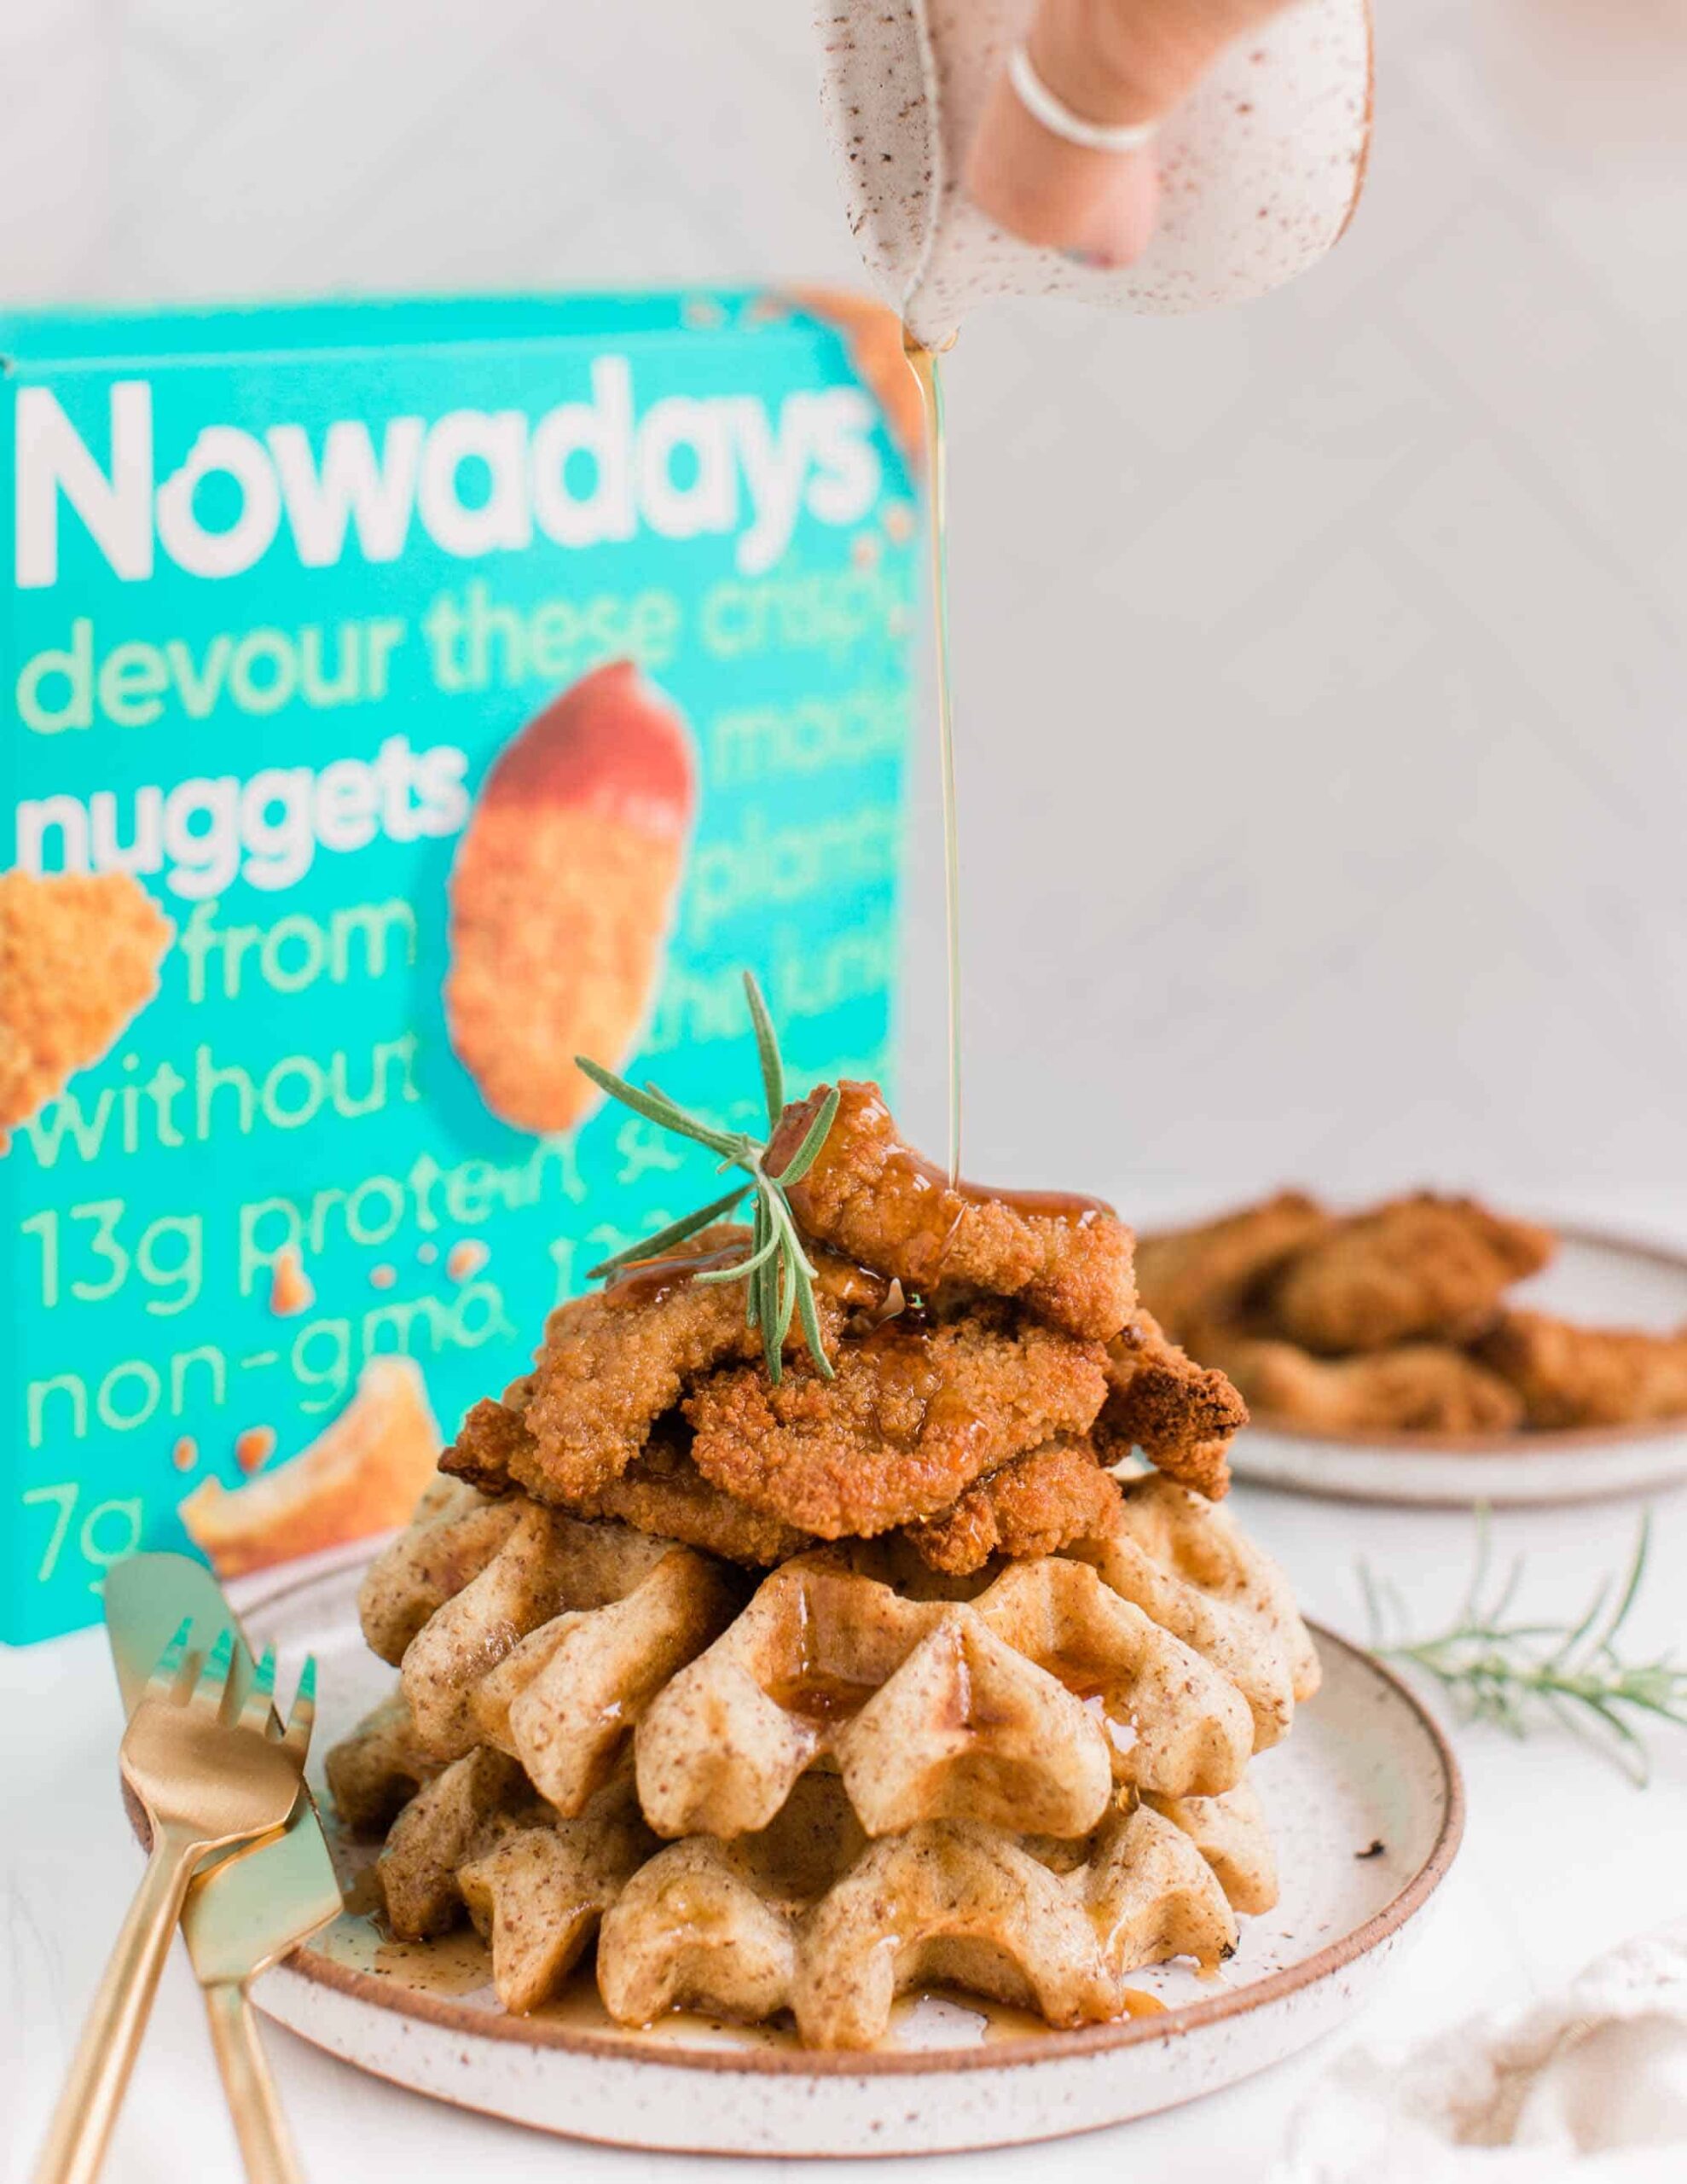 Vegan Chicken and Waffles Stacked on a Plate With a Hand Pouring Maple Syrup on Top in front of a Nowadays Vegan Nuggets Box